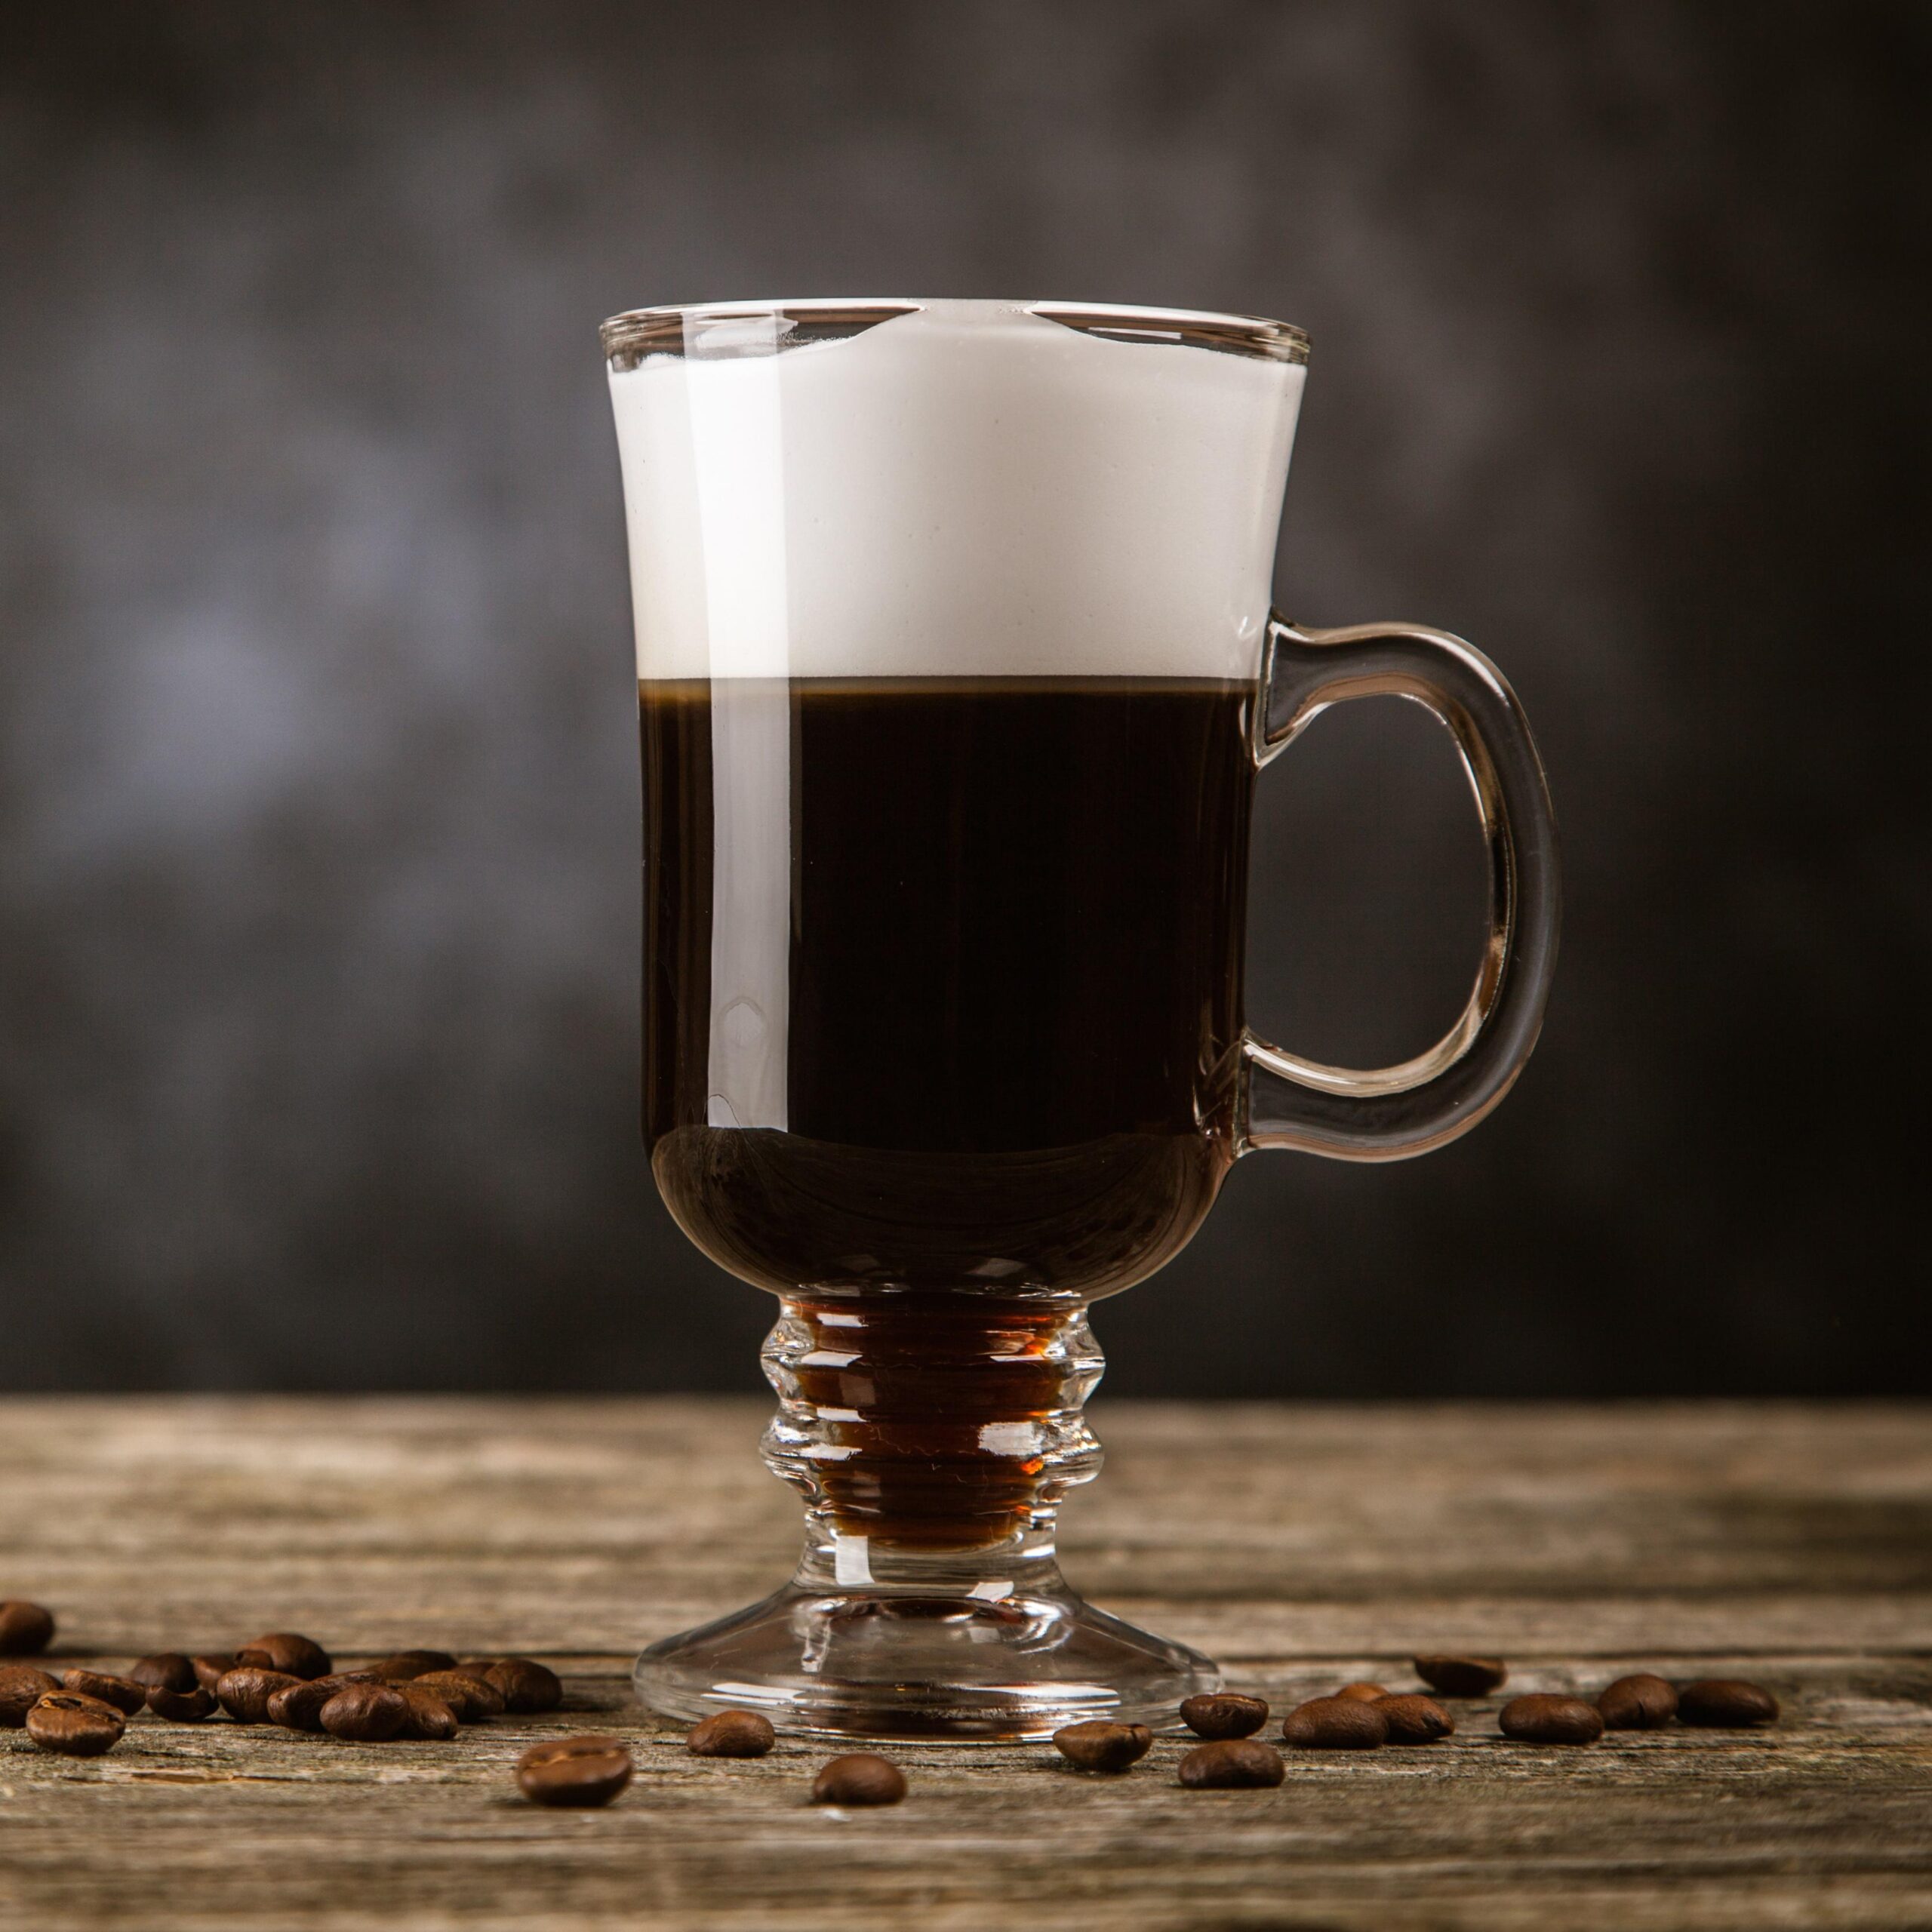  The aroma of freshly brewed coffee and whiskey will soothe your senses.